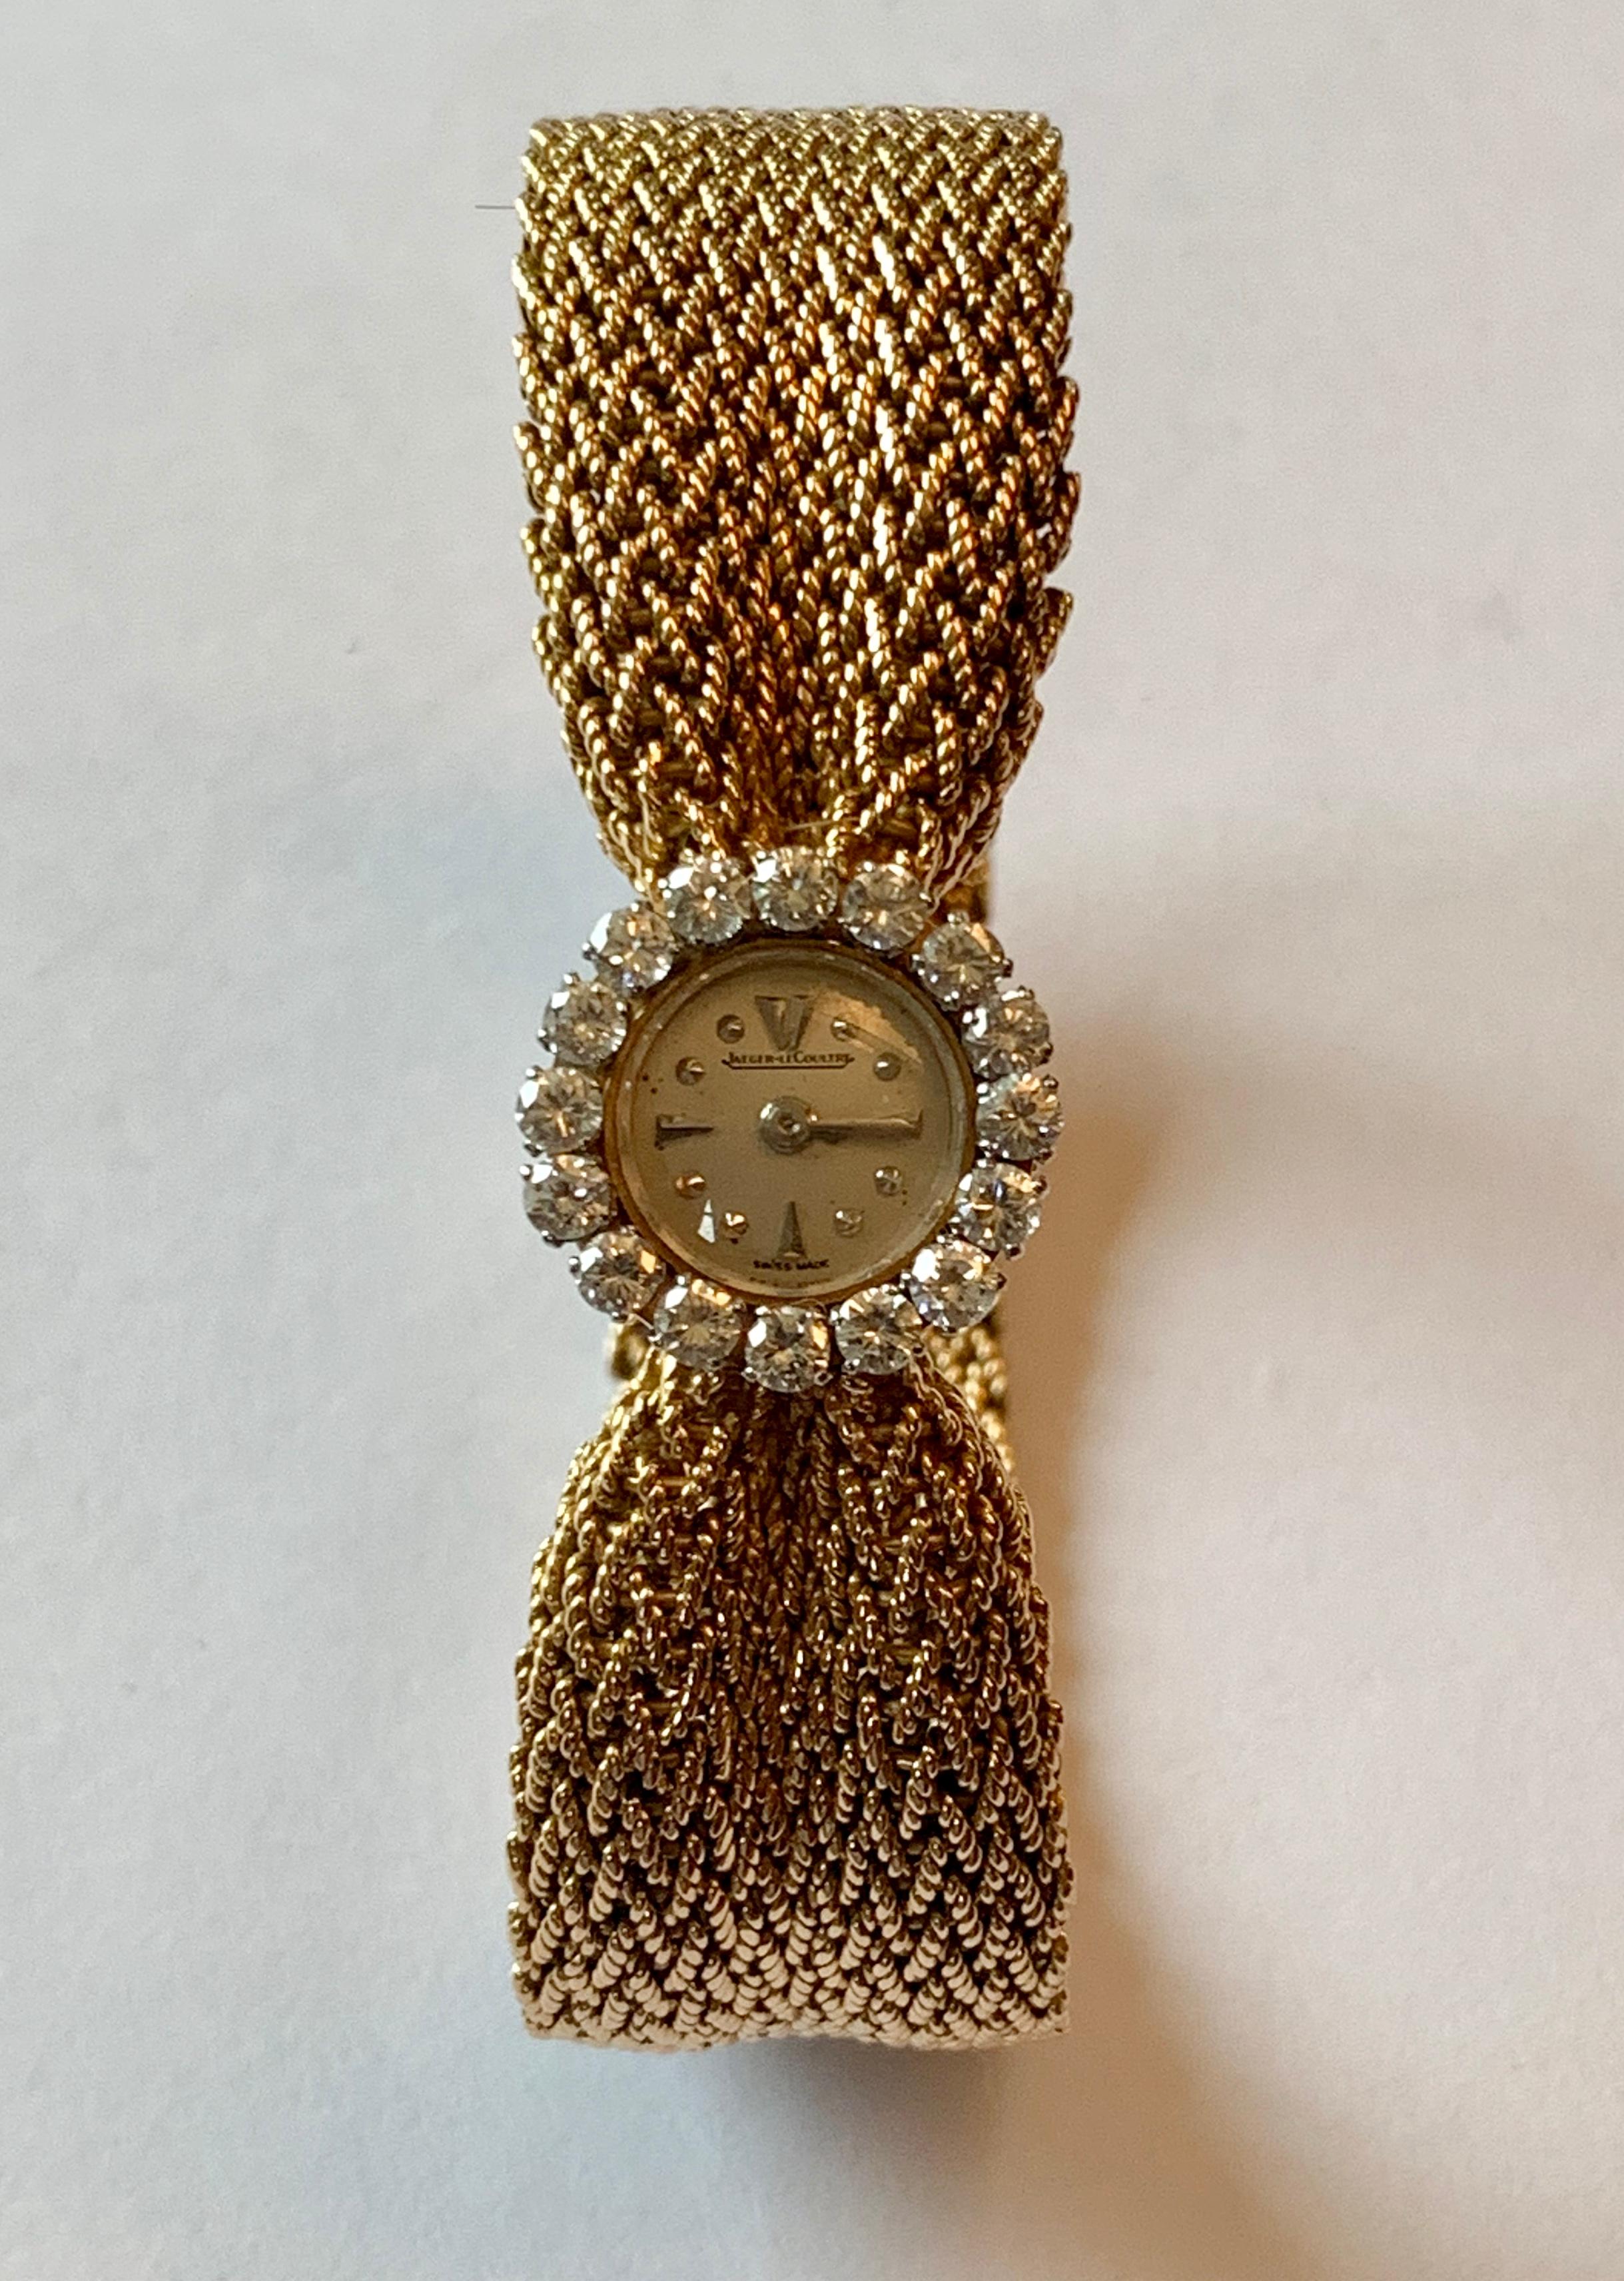 This classic and sophisticated ladies dress watch was produced by the premier house of  Jaeger LeCoultre in the mid-century. The Lady's dress watch is classy and sophisticated! Manual winding. 16 brilliant cut Diamonds weighing approximately 1 ct.